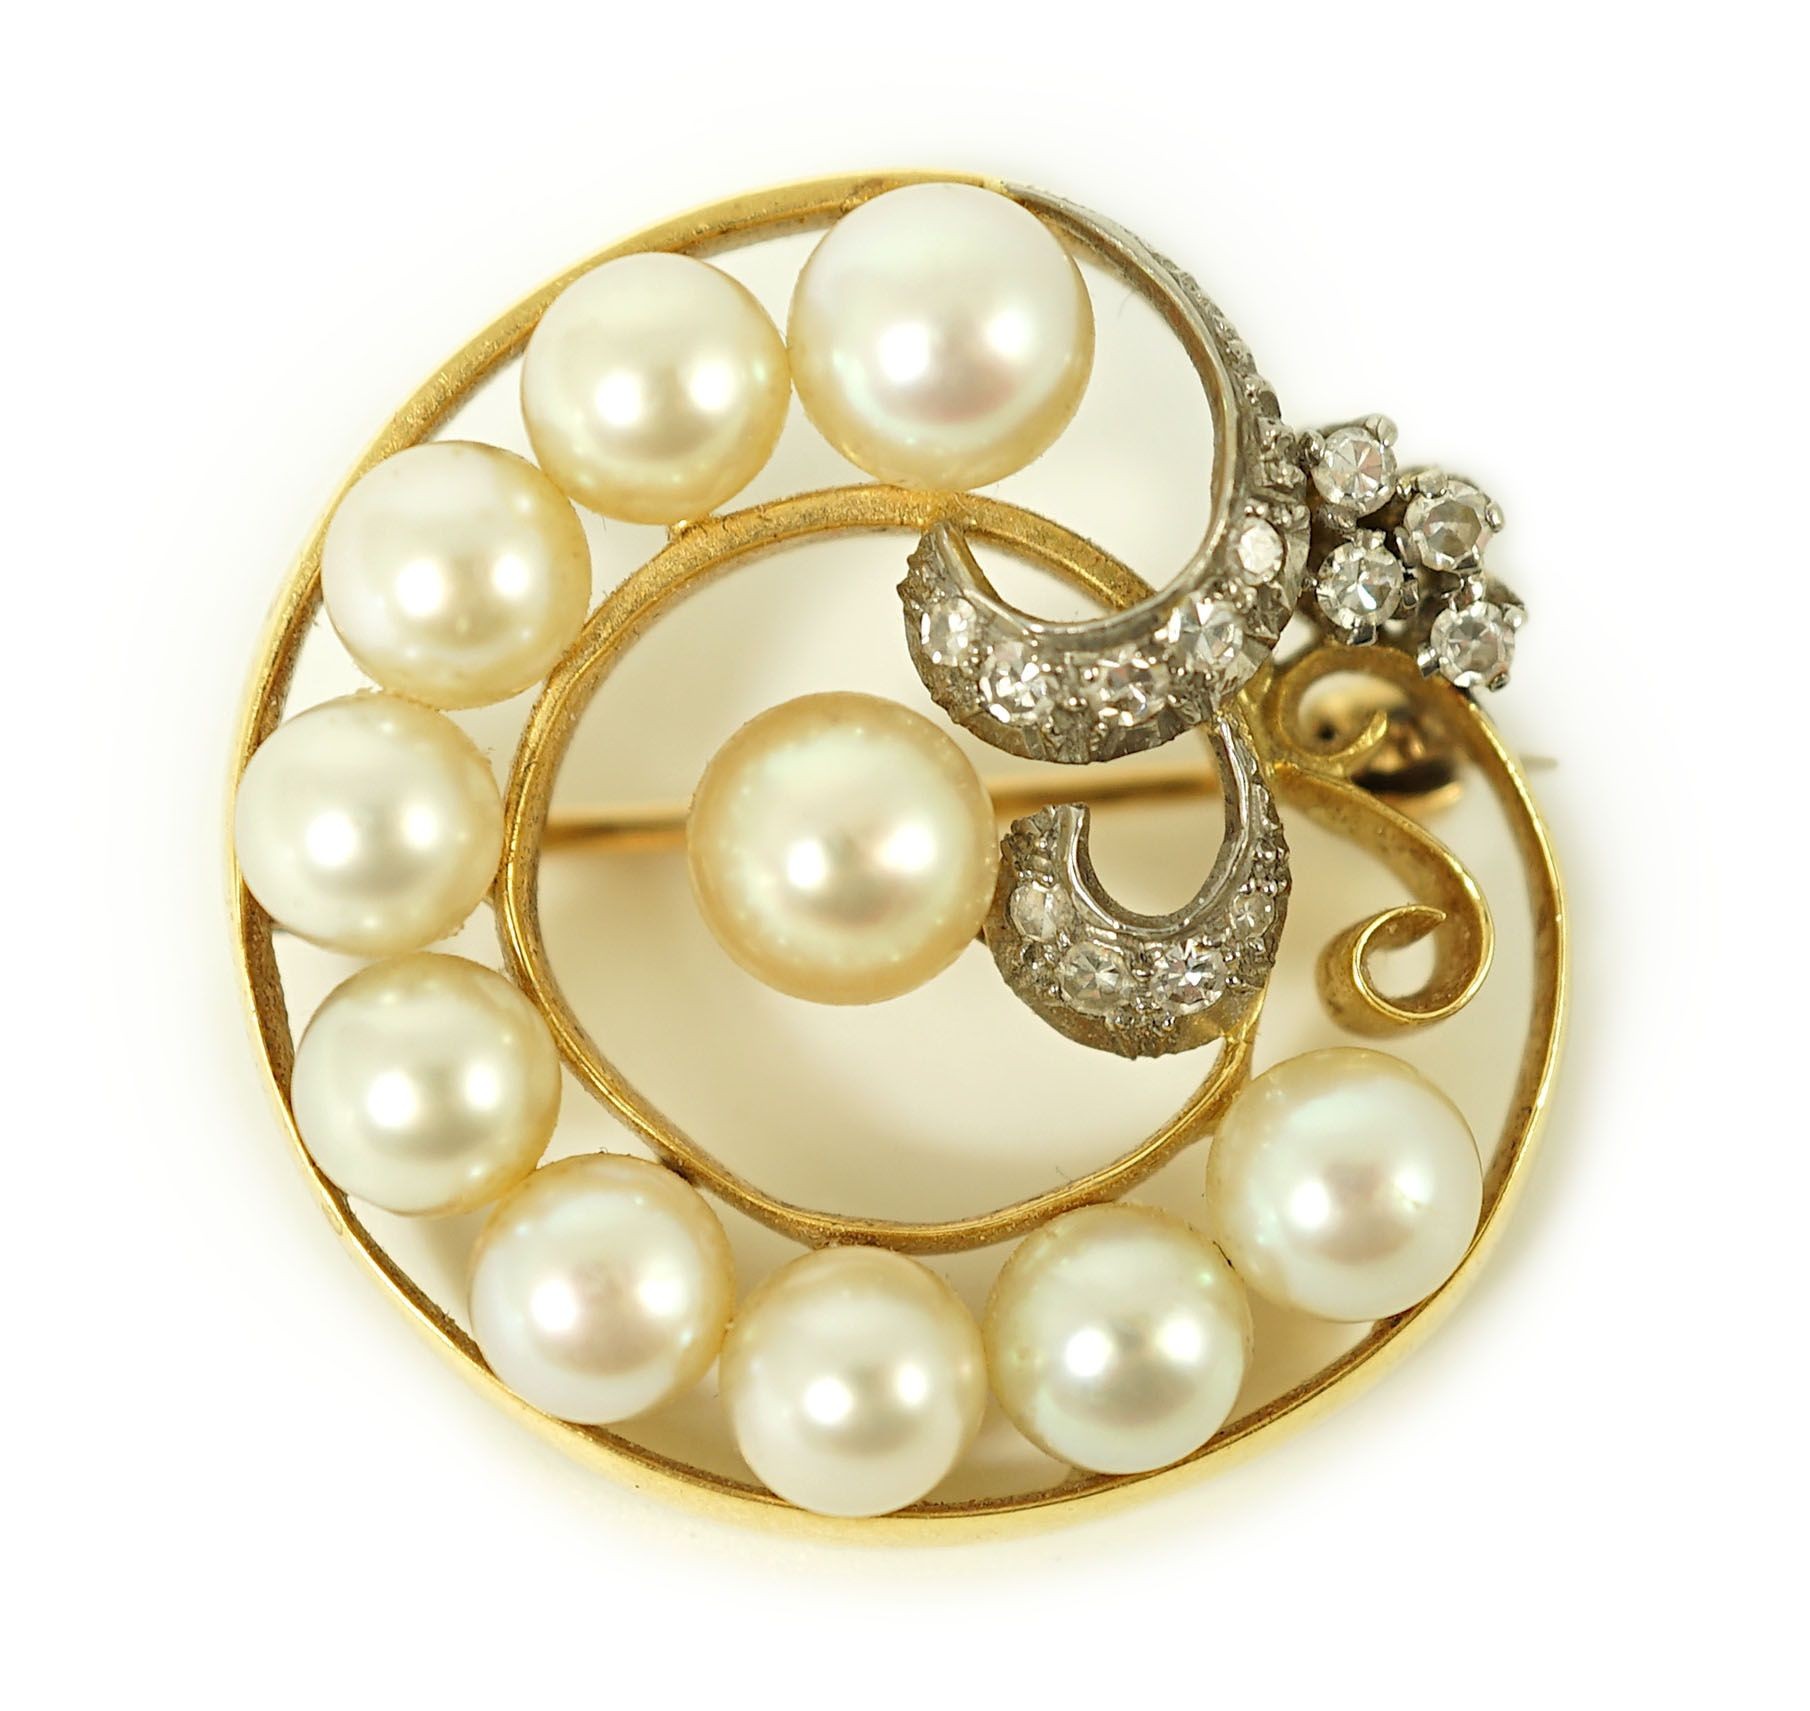 A 20th century gold, cultured pearl and diamond set open work scroll brooch